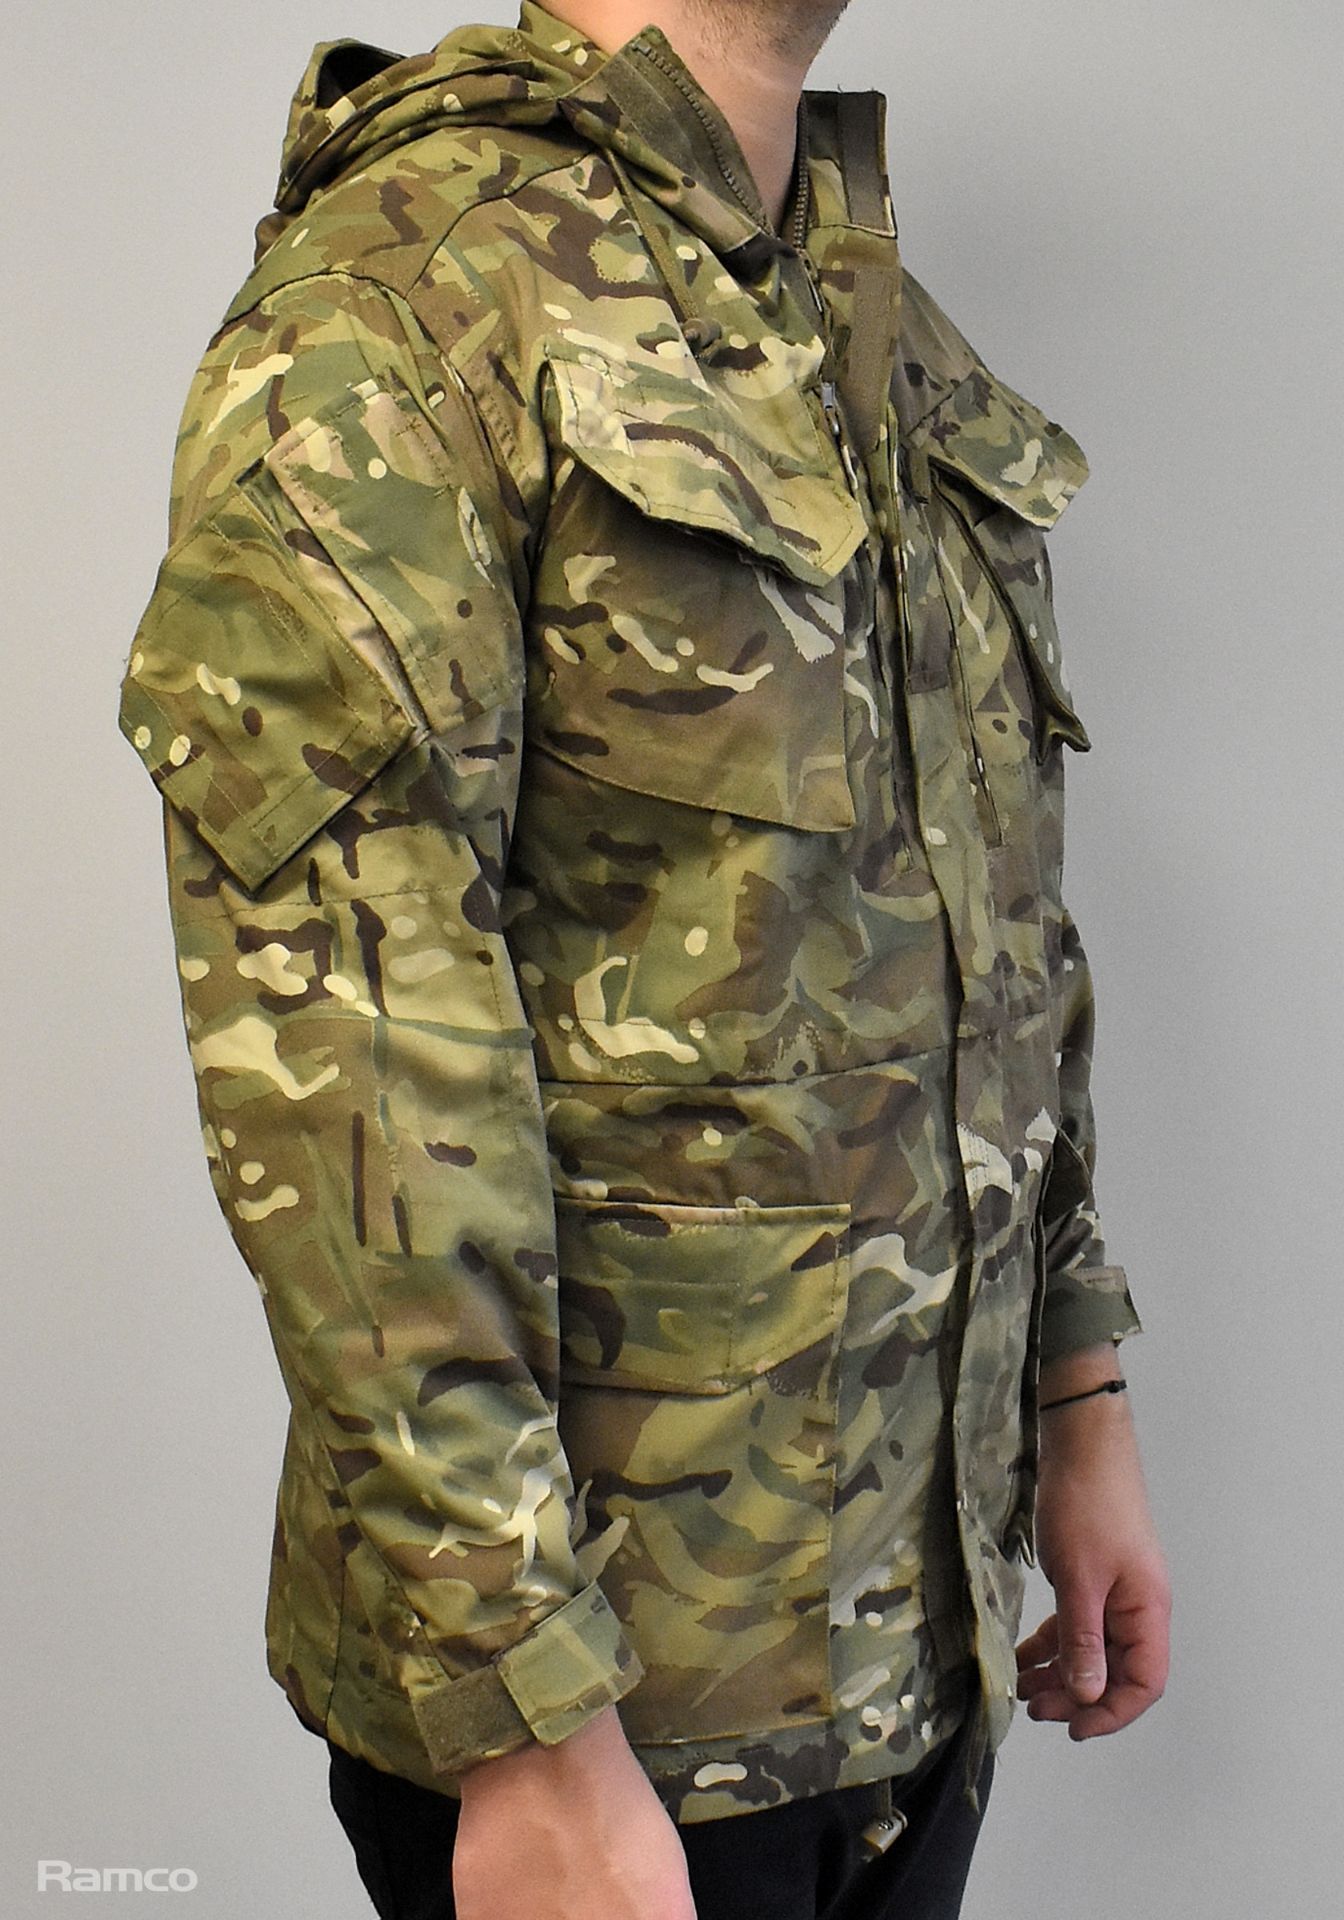 40x British Army MTP combat smocks 2 windproof - mixed grades and sizes - Image 4 of 12